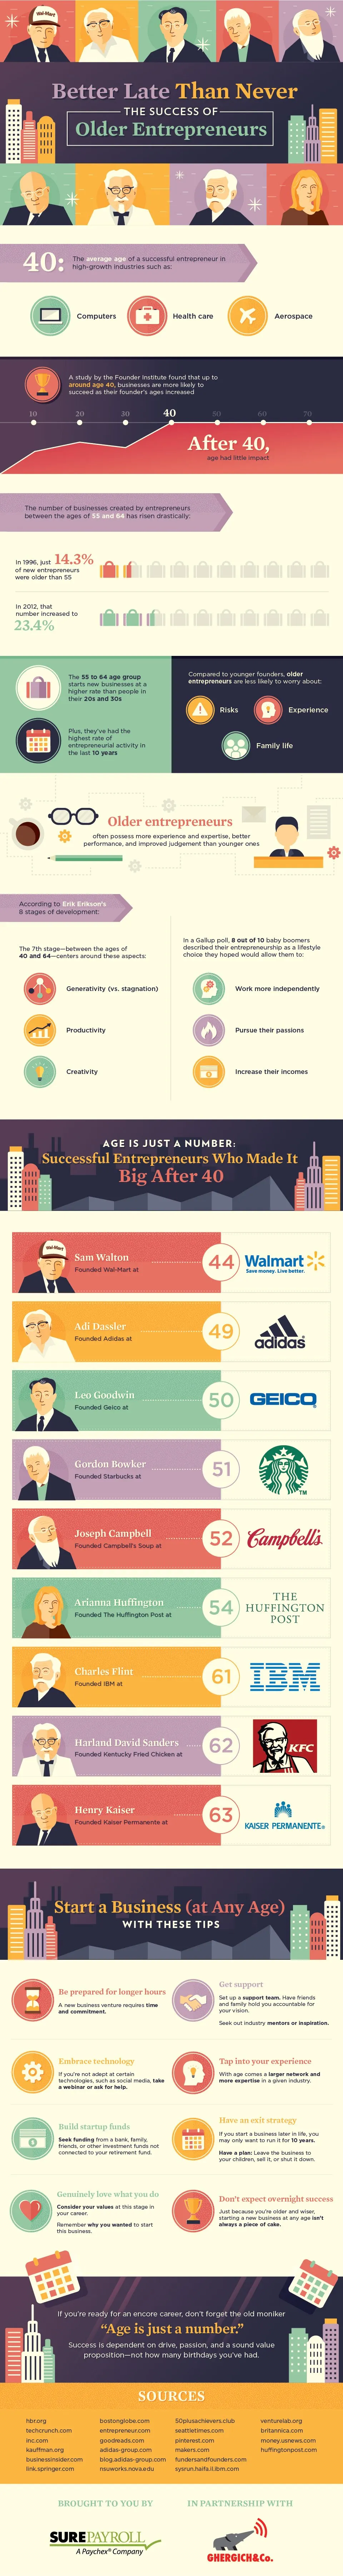 The Success Of The Entrepreneurs Who Started Late (infographic)